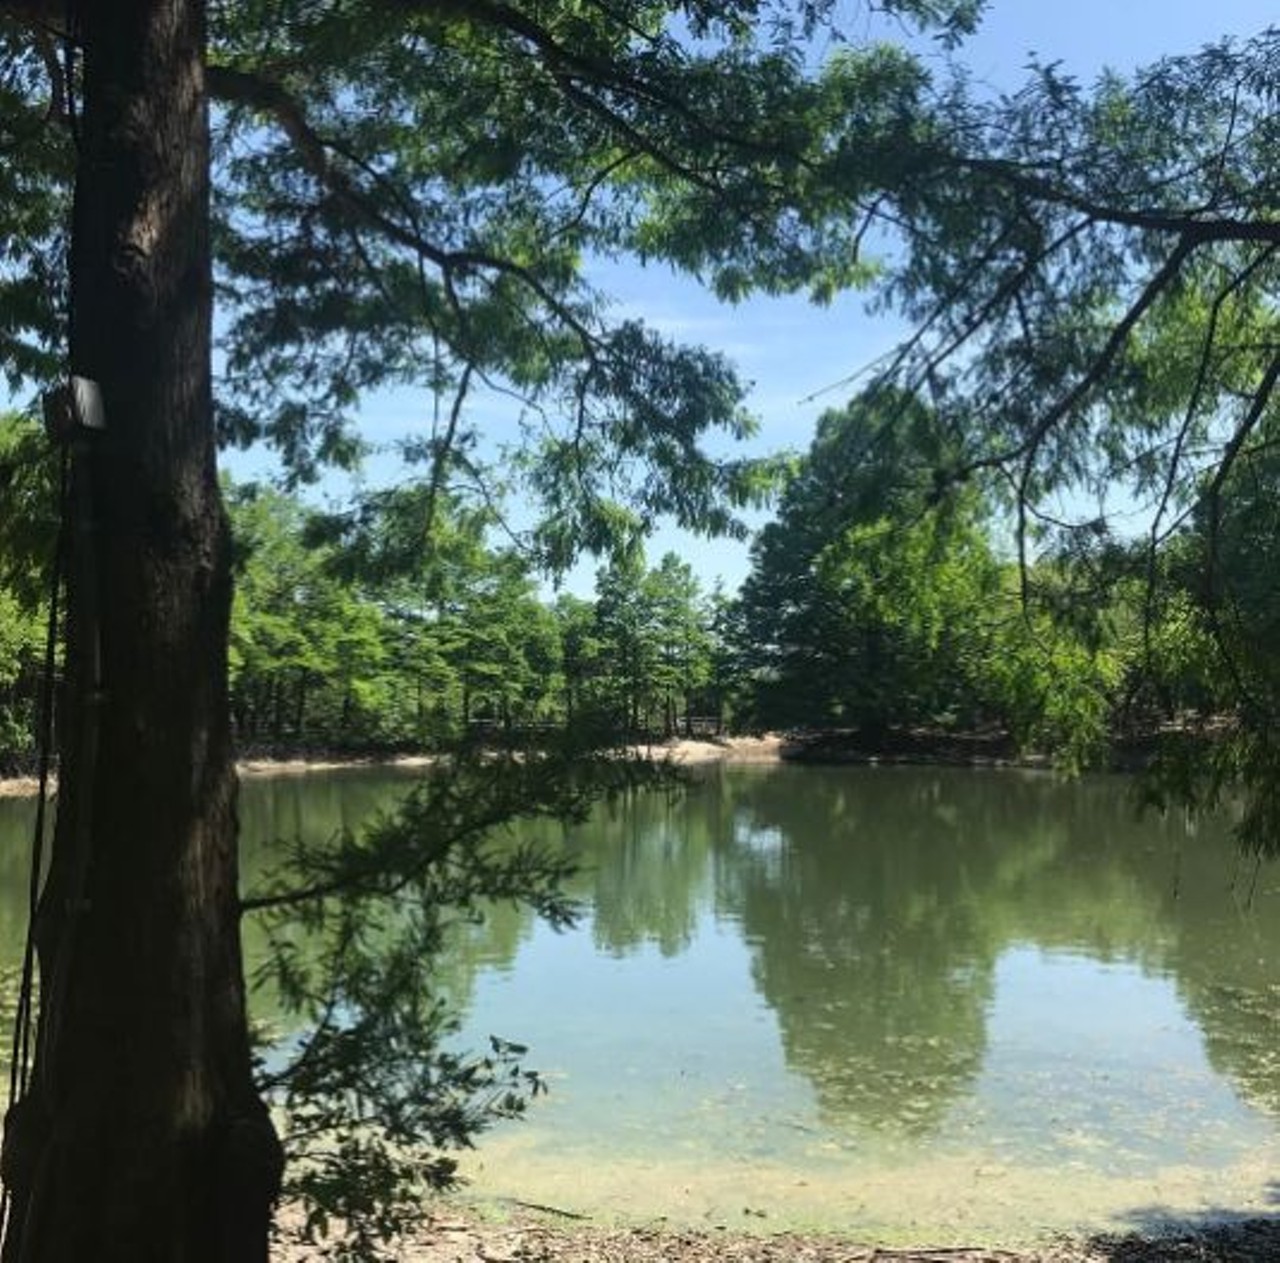 Denman Estate Park  
7735 Mockingbird Lane, (210) 207-7275
This park boasts beautiful landscape, a Japanese garden and historic landmarks. It&#146;s a beautiful and relaxing spot for a picnic with friends.
Photo via Instagram, tenthousandvoices